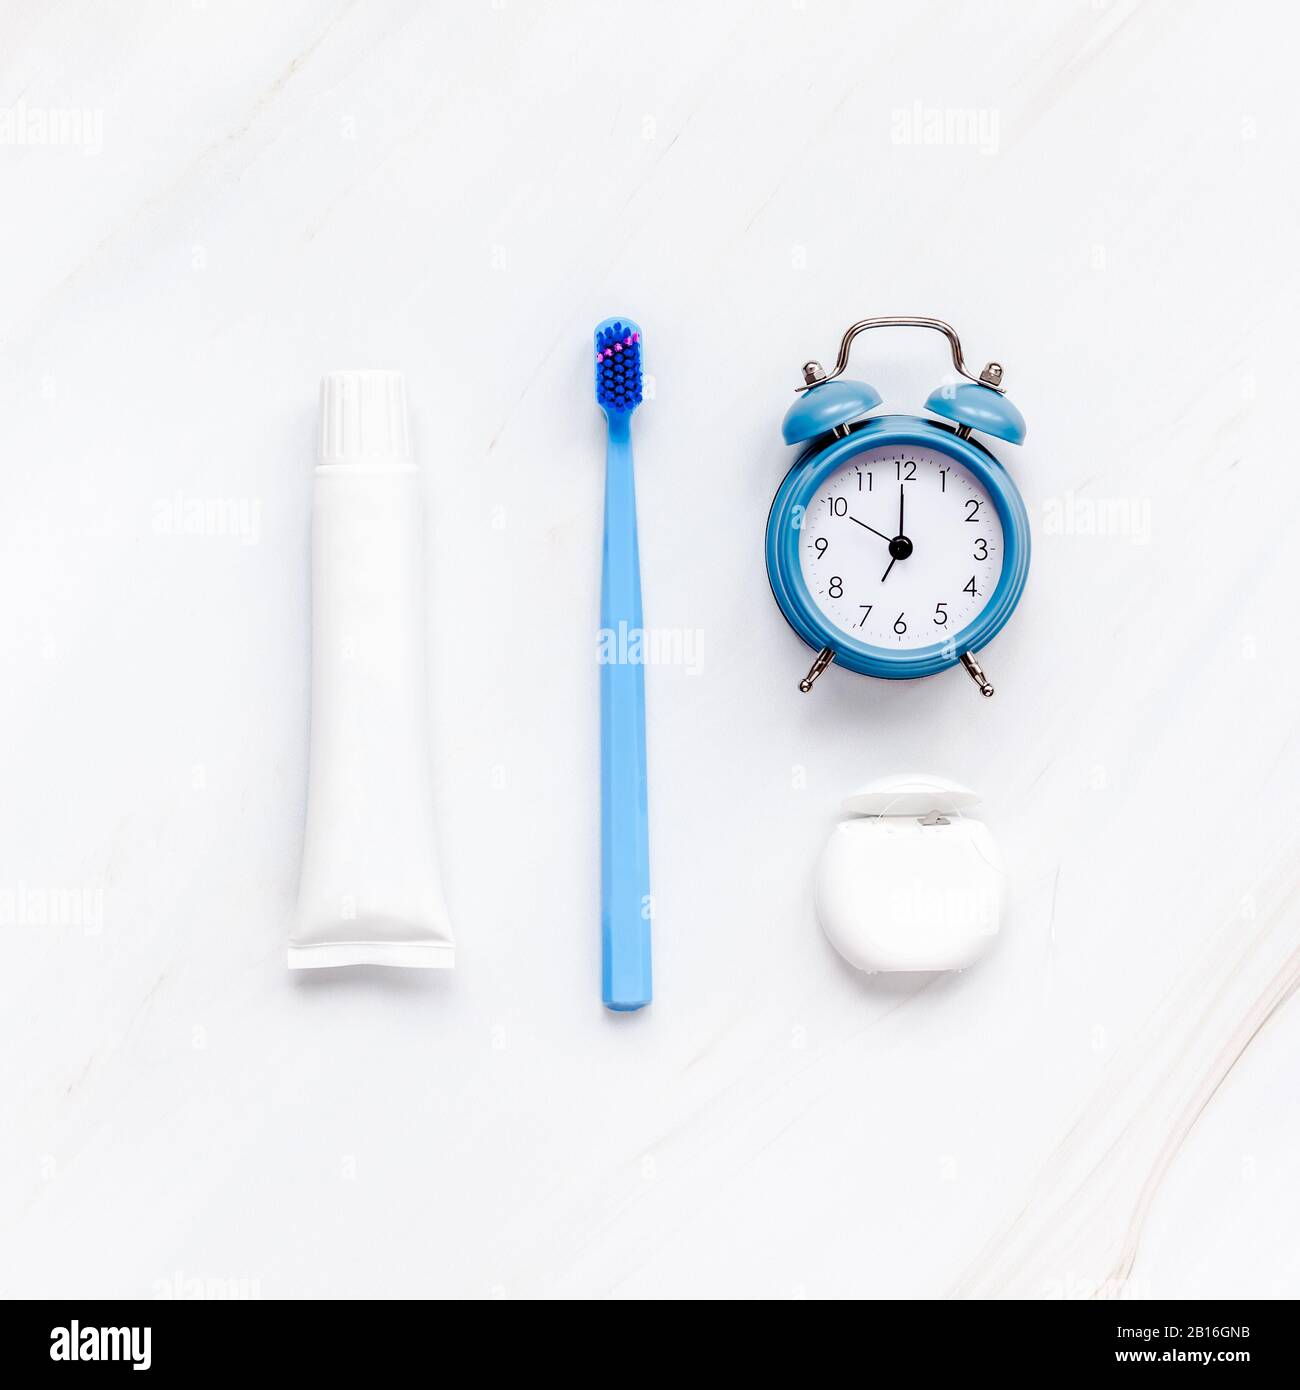 Teeth hygiene and oral dental care products with blue alarm clock on white marble table background with copy space. Blank tube of toothpaste and brush Stock Photo